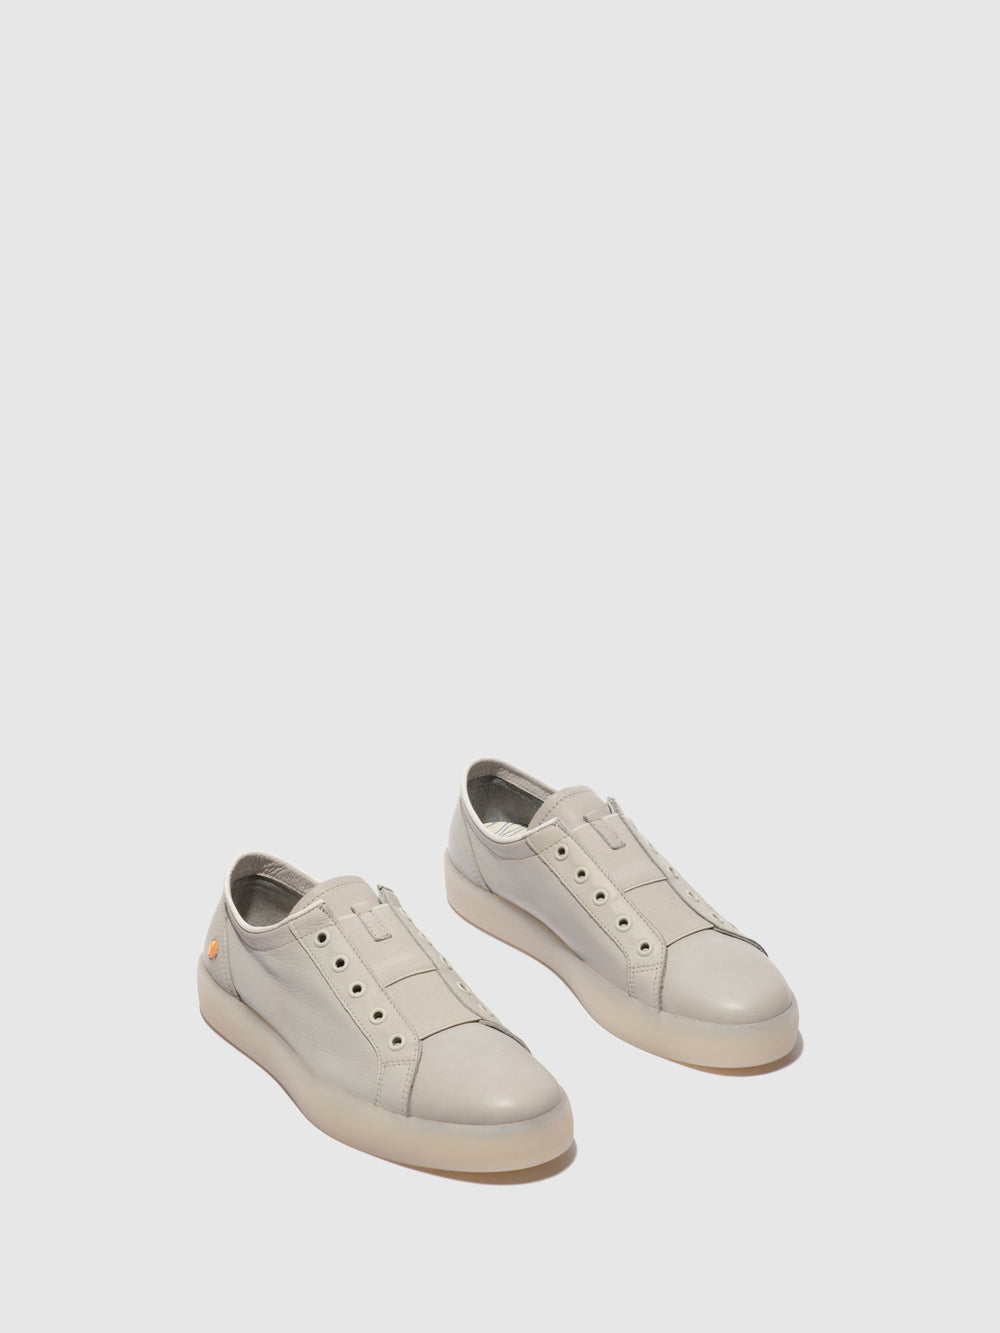 Slip-on Trainers RION647SOF SMOOTH LIGHT GREY